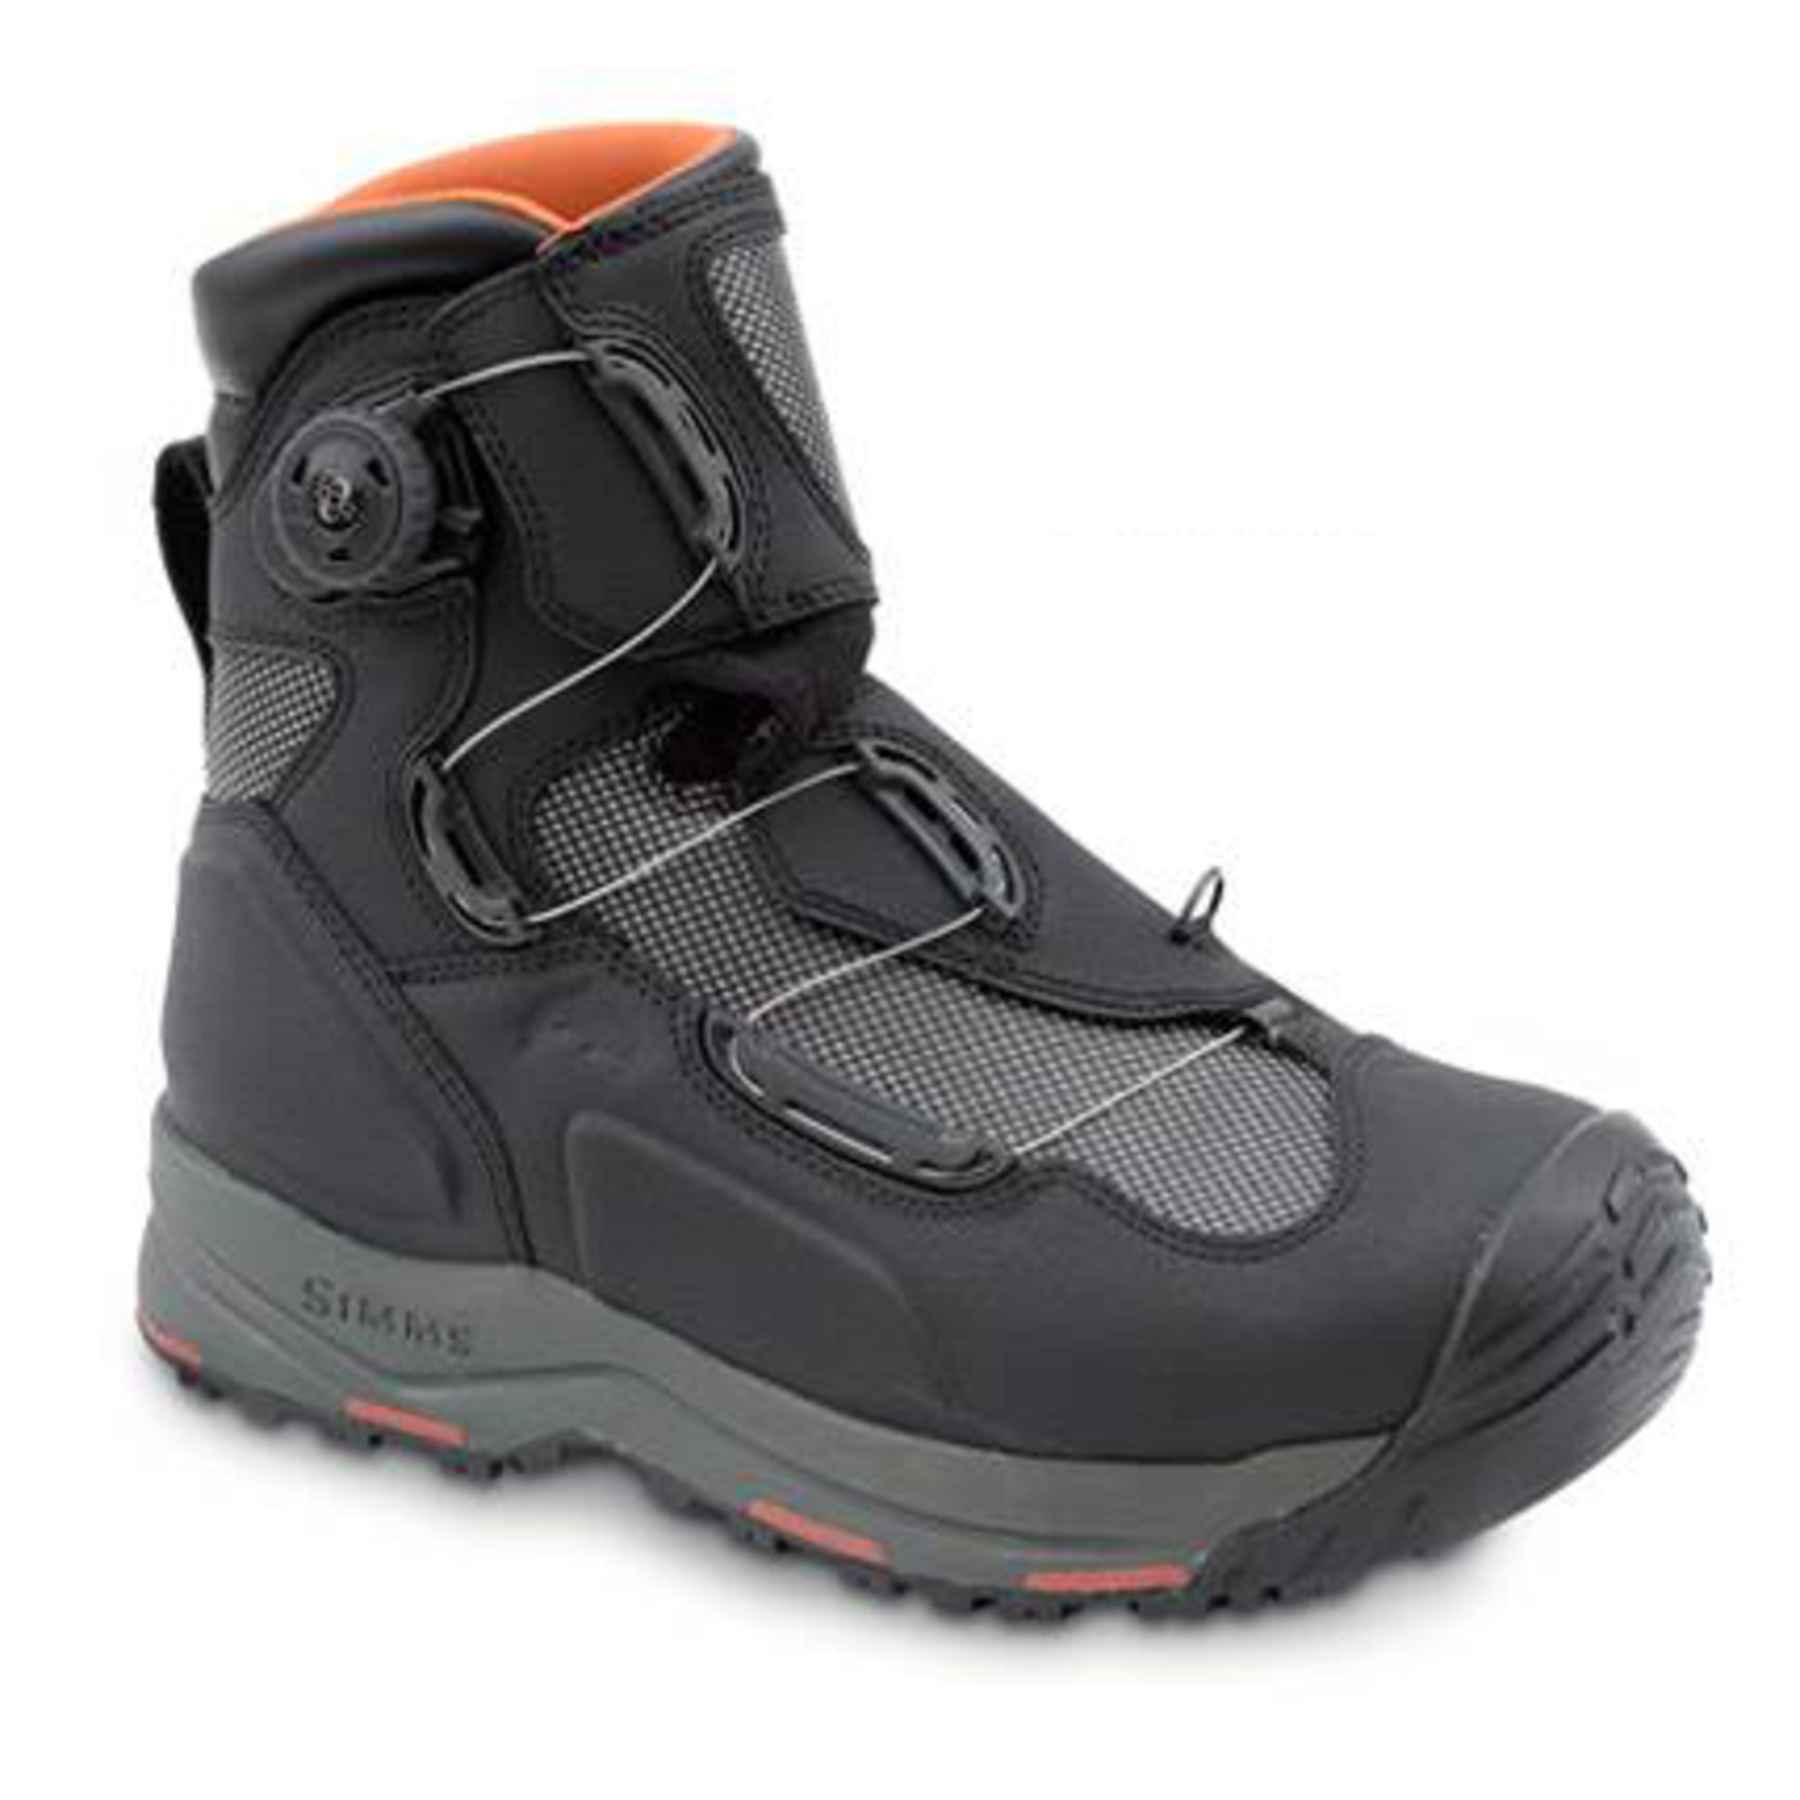 Simms Introduces New Boots, Waders & Much More at IFTD 2013 | Hatch ...